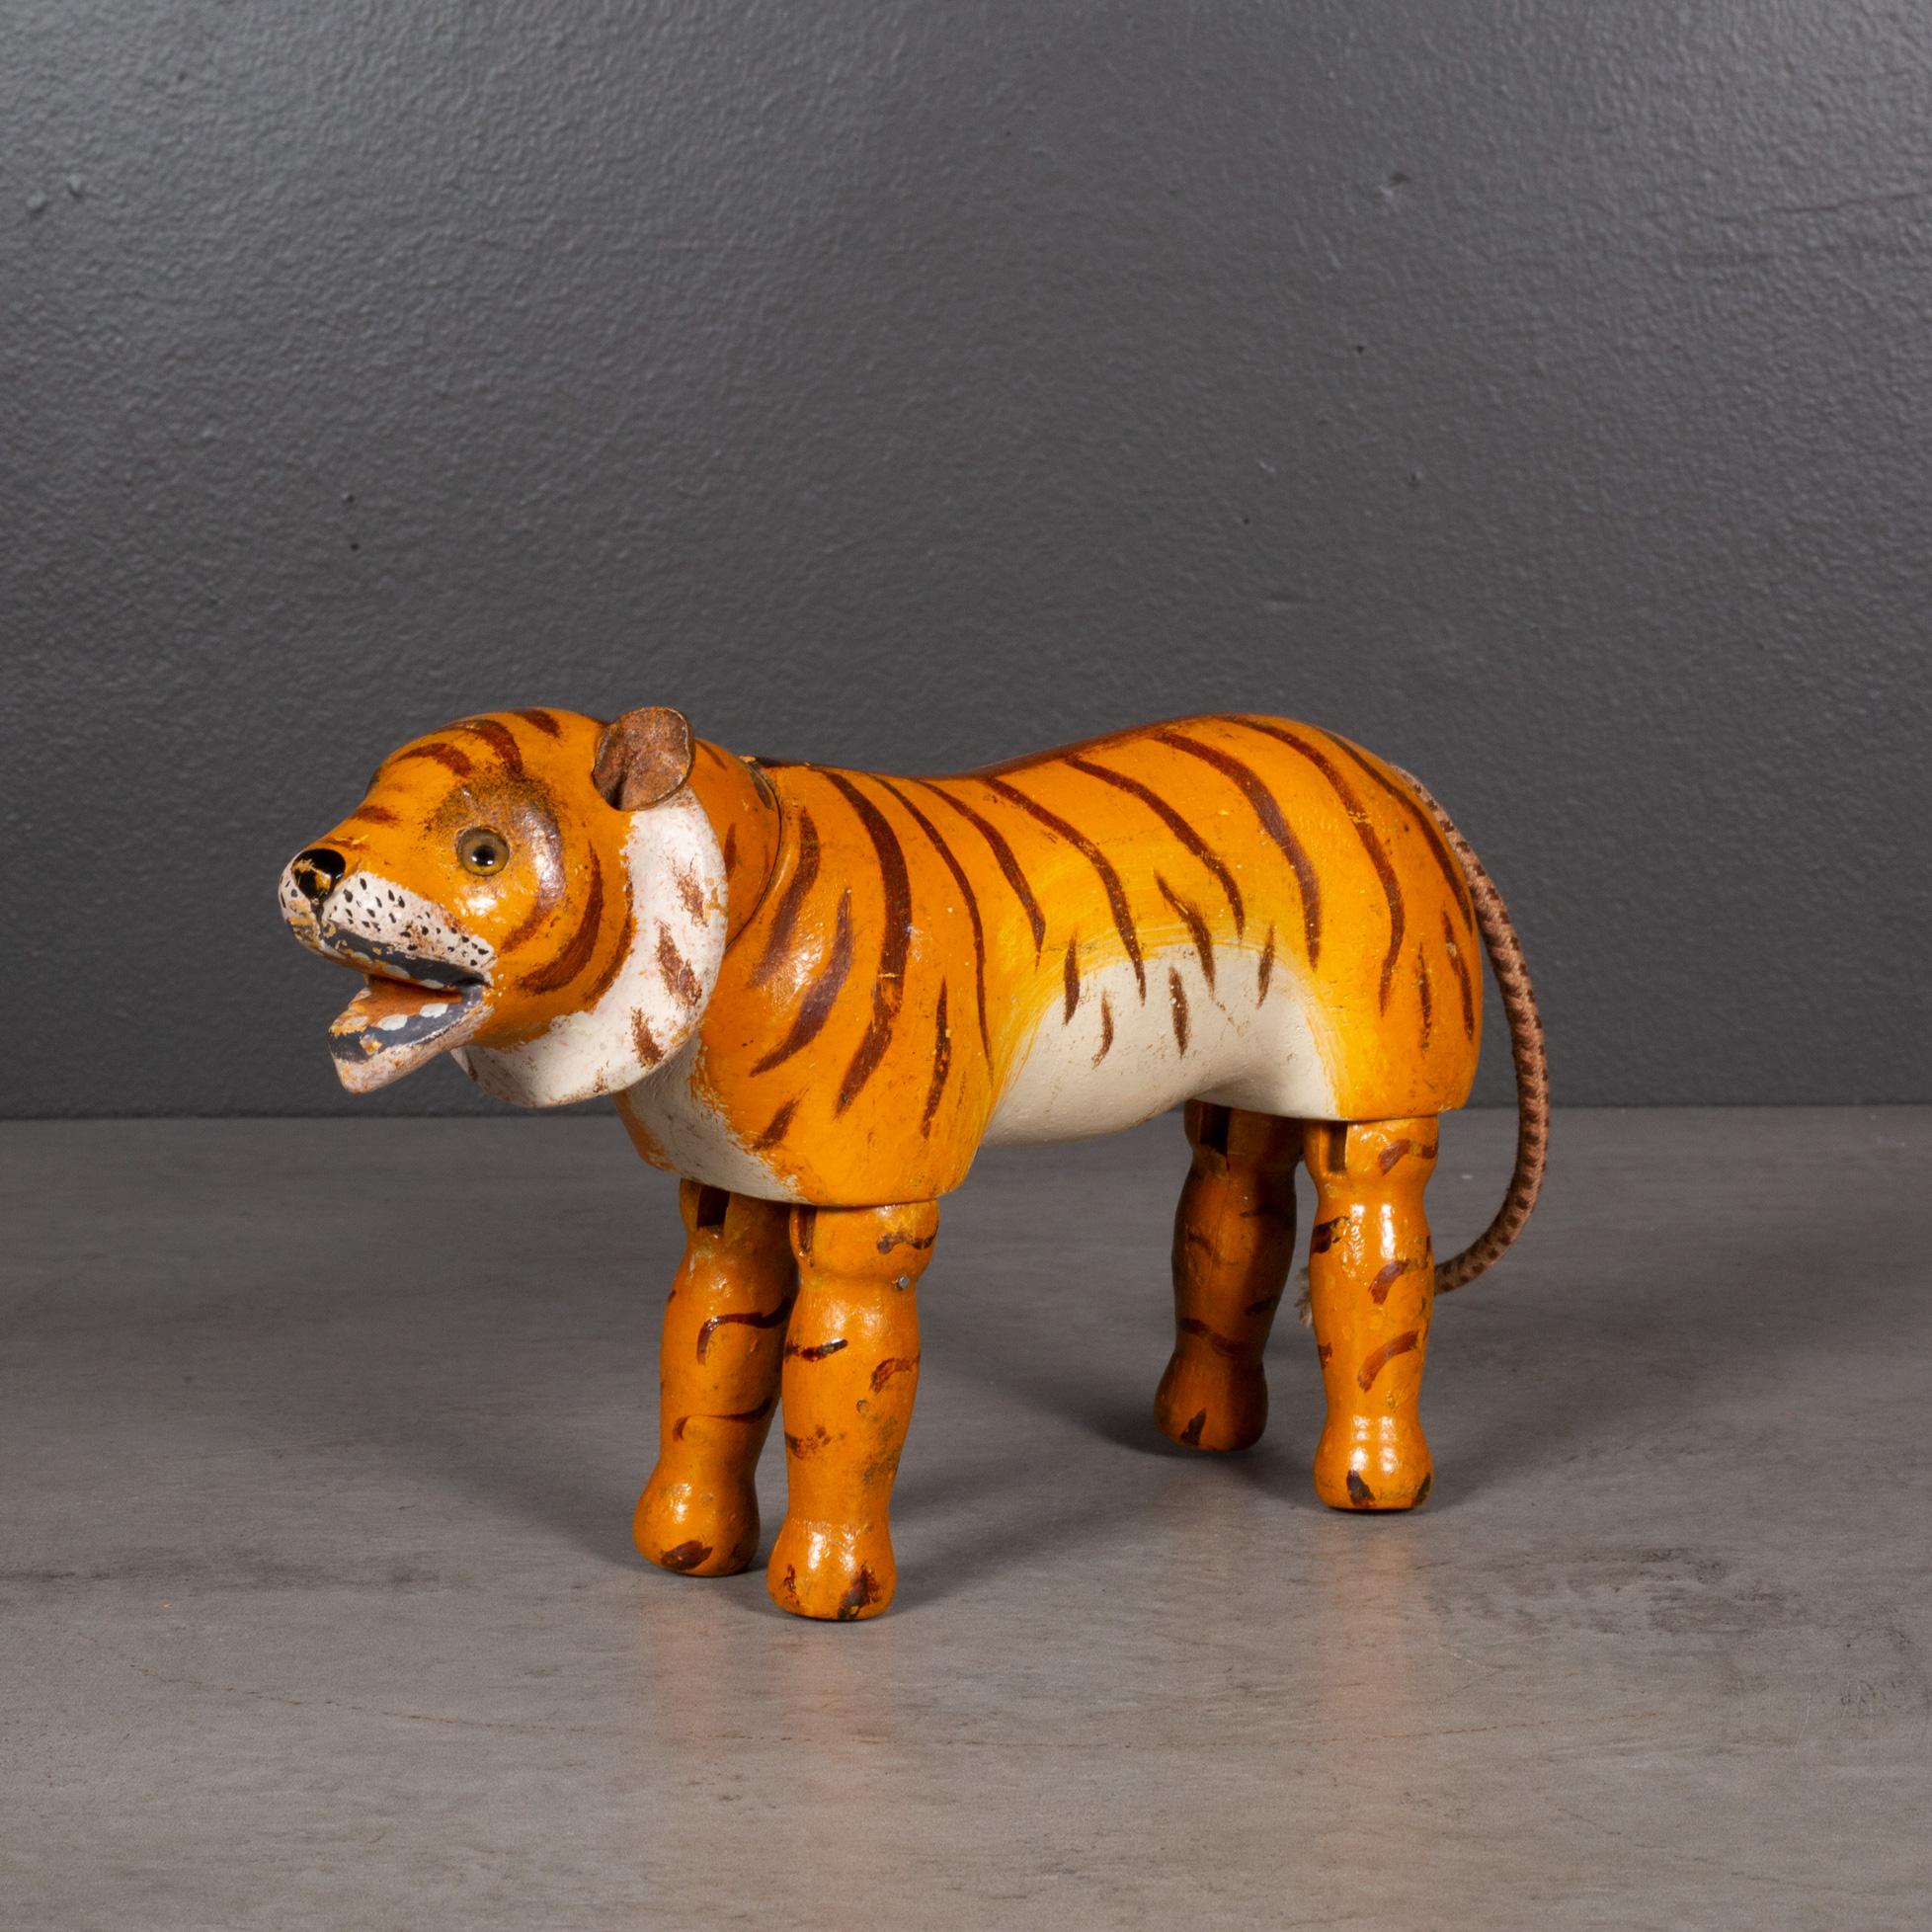 ABOUT

Jointed wooden Tiger manufactured in the 1900s by the Schoenhut Piano Company as part of the 